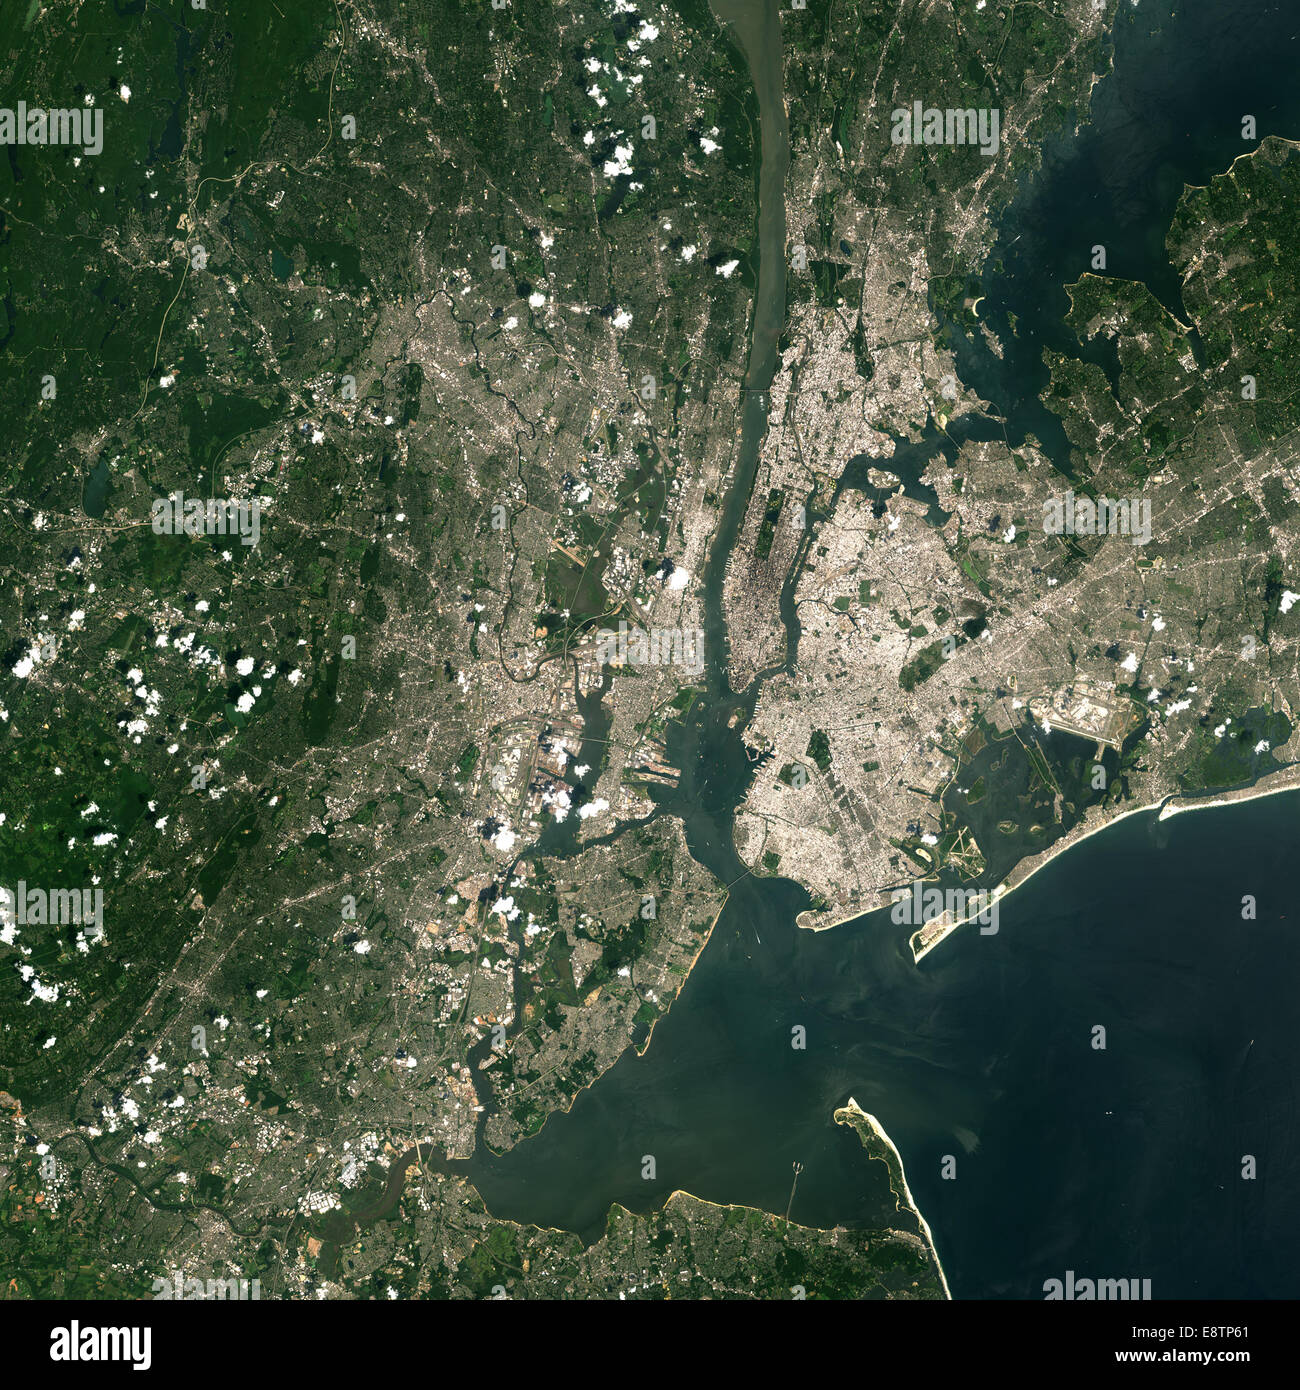 Landsat 7 image of East Rutherford, NJ acquired August 20, 2013.  Landsat 7 is a U.S. satellite used to acquire remotely sensed Stock Photo